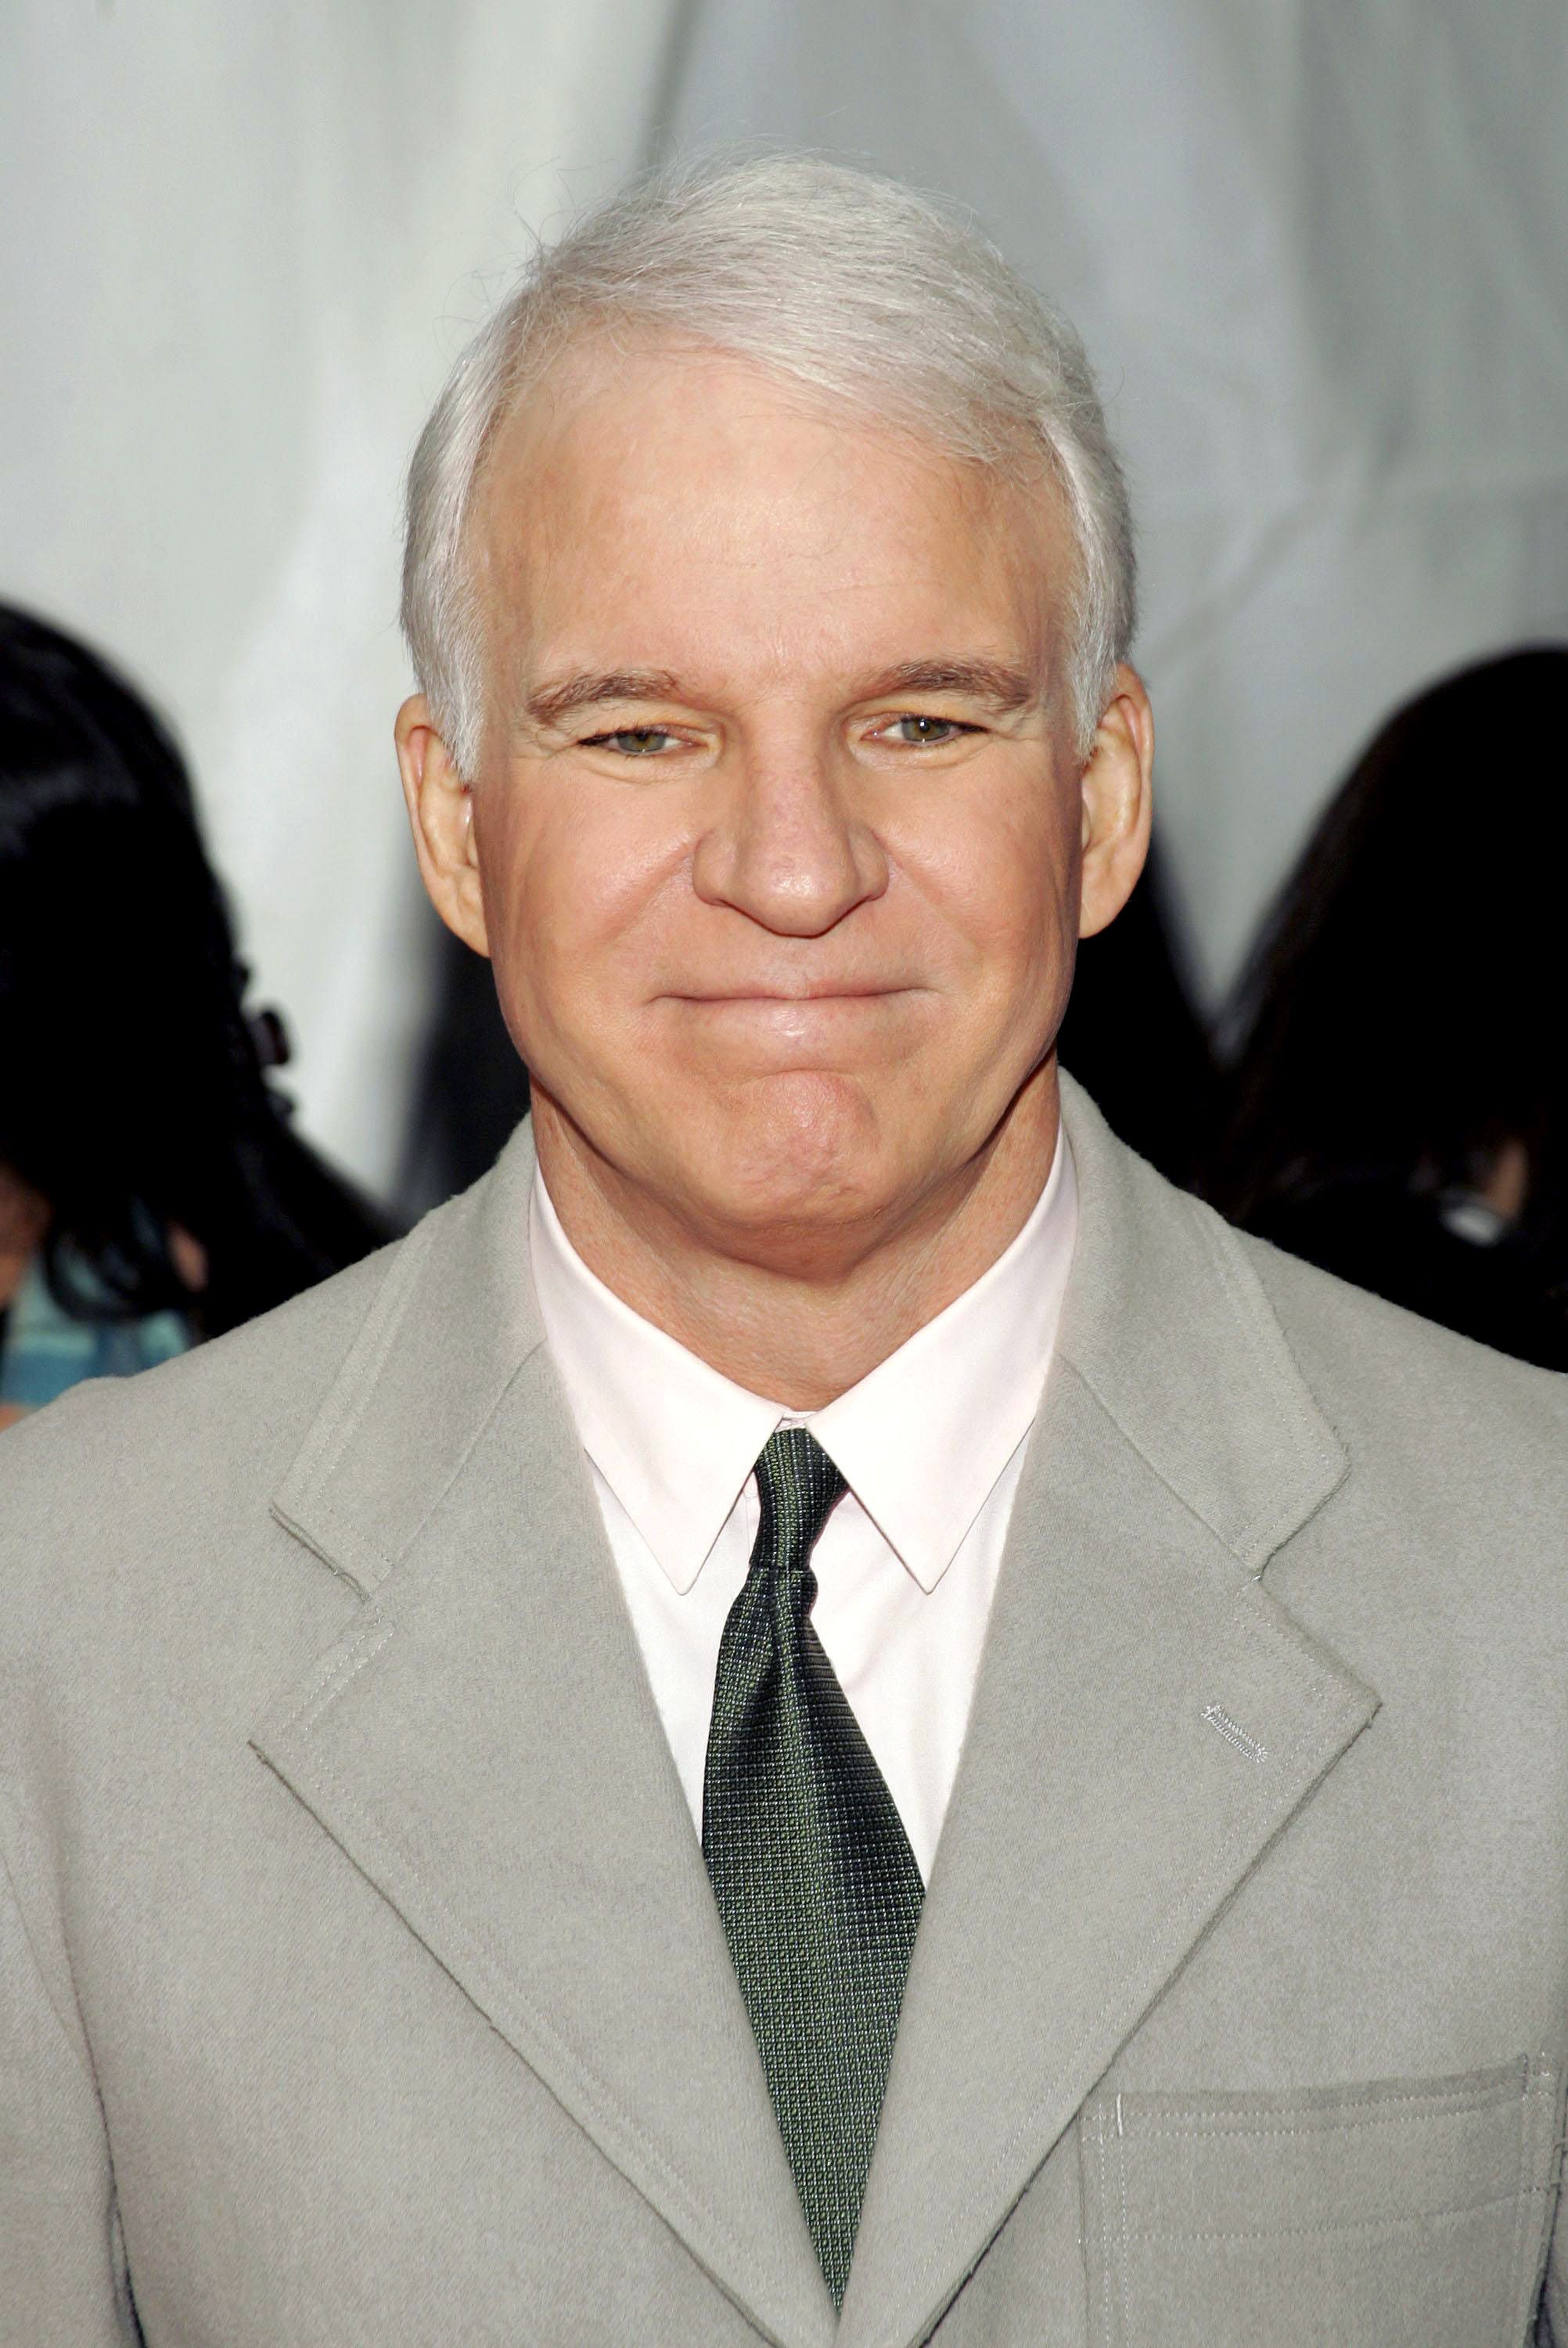 Steve Martin wears a gray suit and tie.